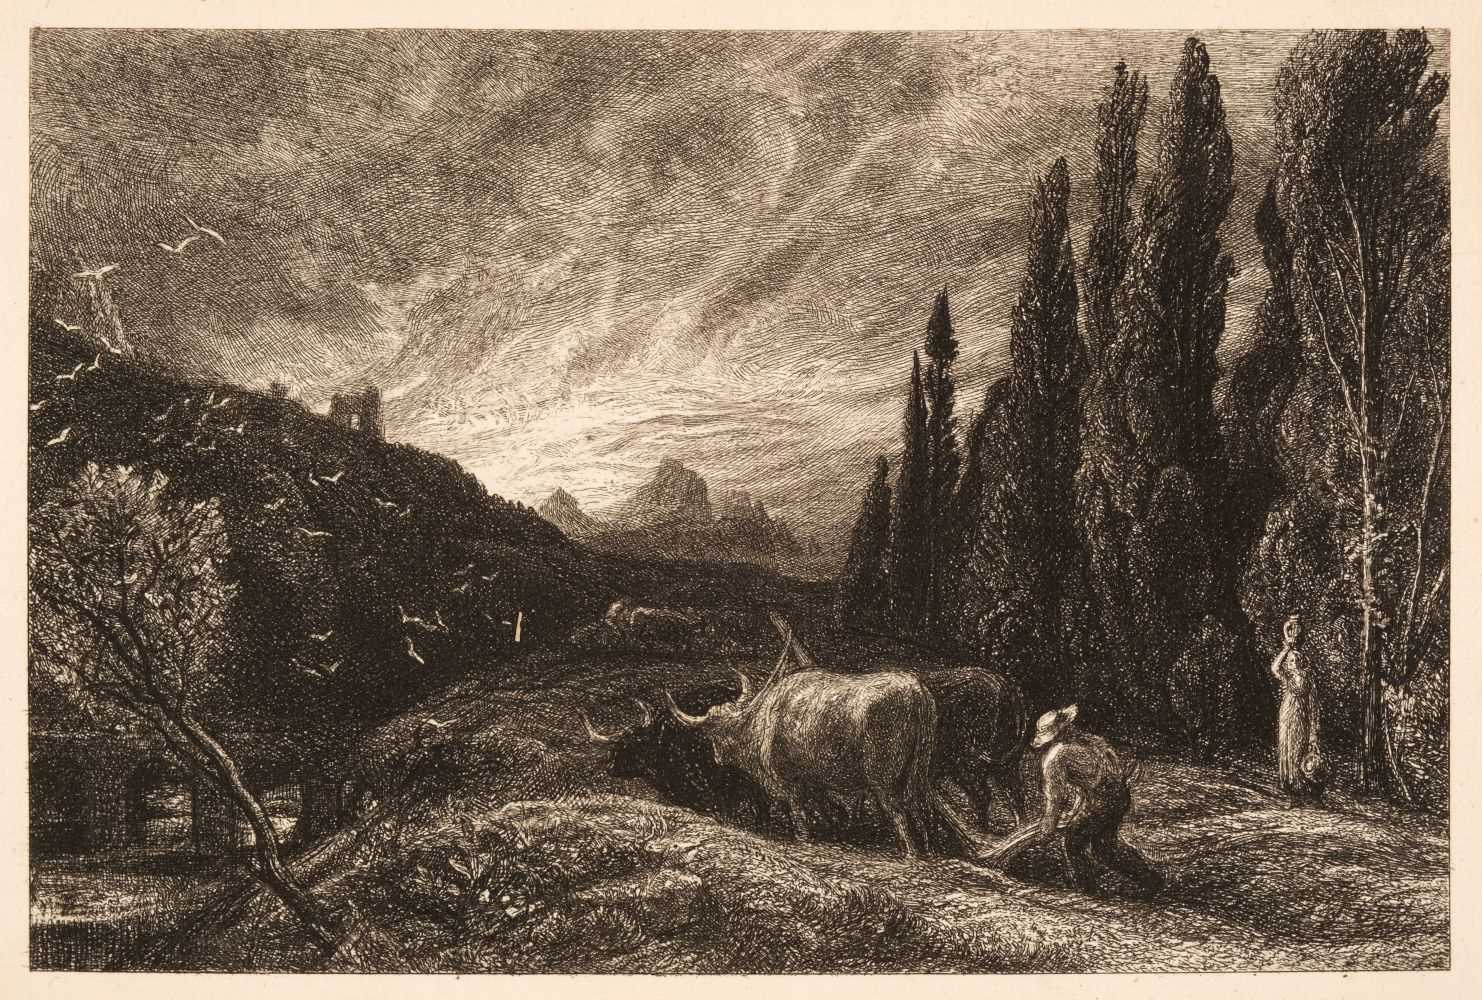 Lot 397 - Palmer (Samuel, 1805-1881). The Early Ploughman or The Morning Spread upon the Mountains, 1861